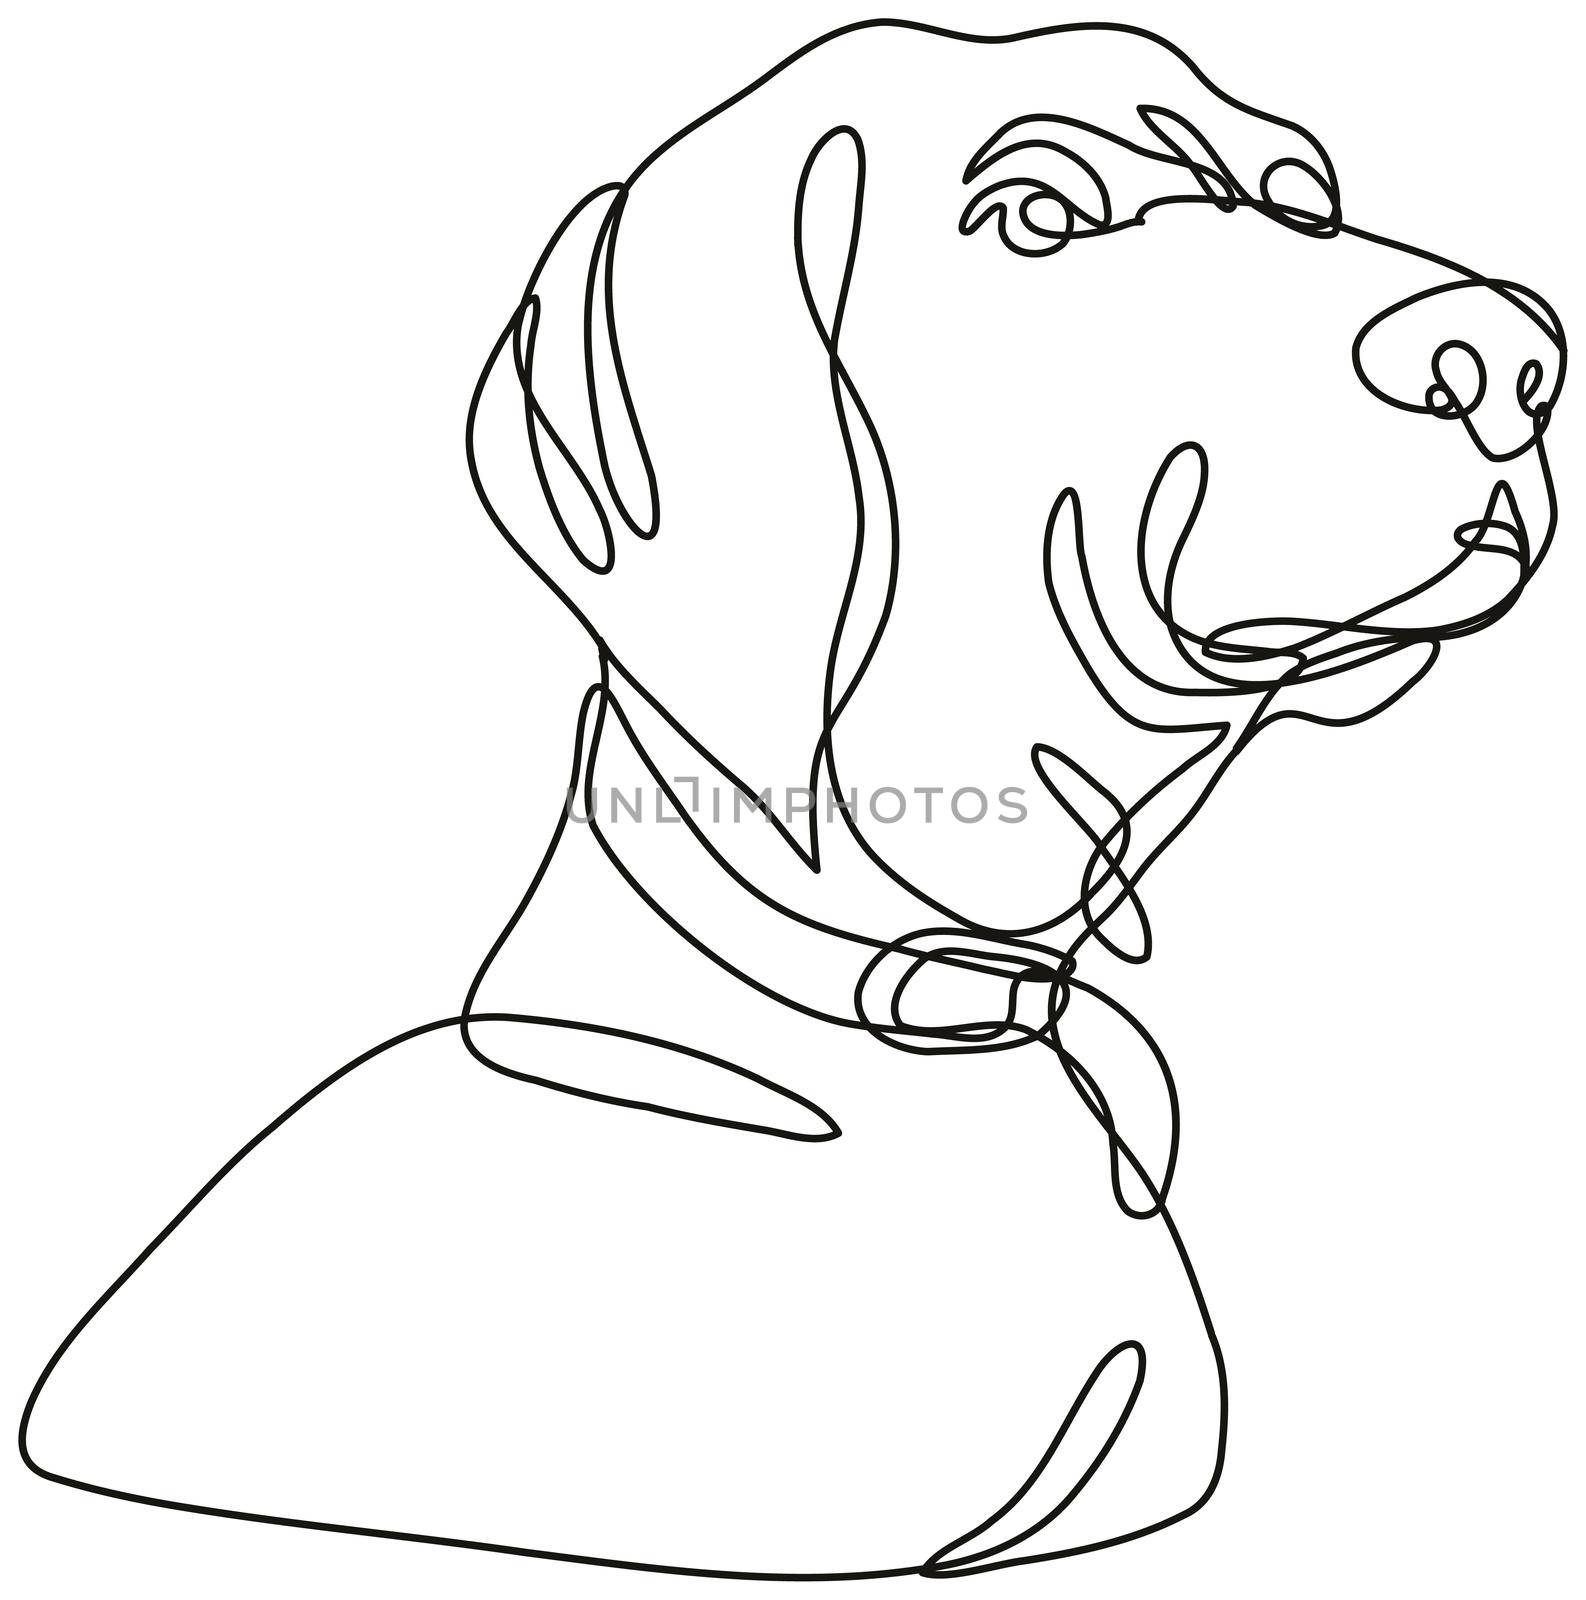 Continuous line drawing illustration of a Labrador retriever dog head looking up  done in mono line or doodle style in black and white on isolated background. 